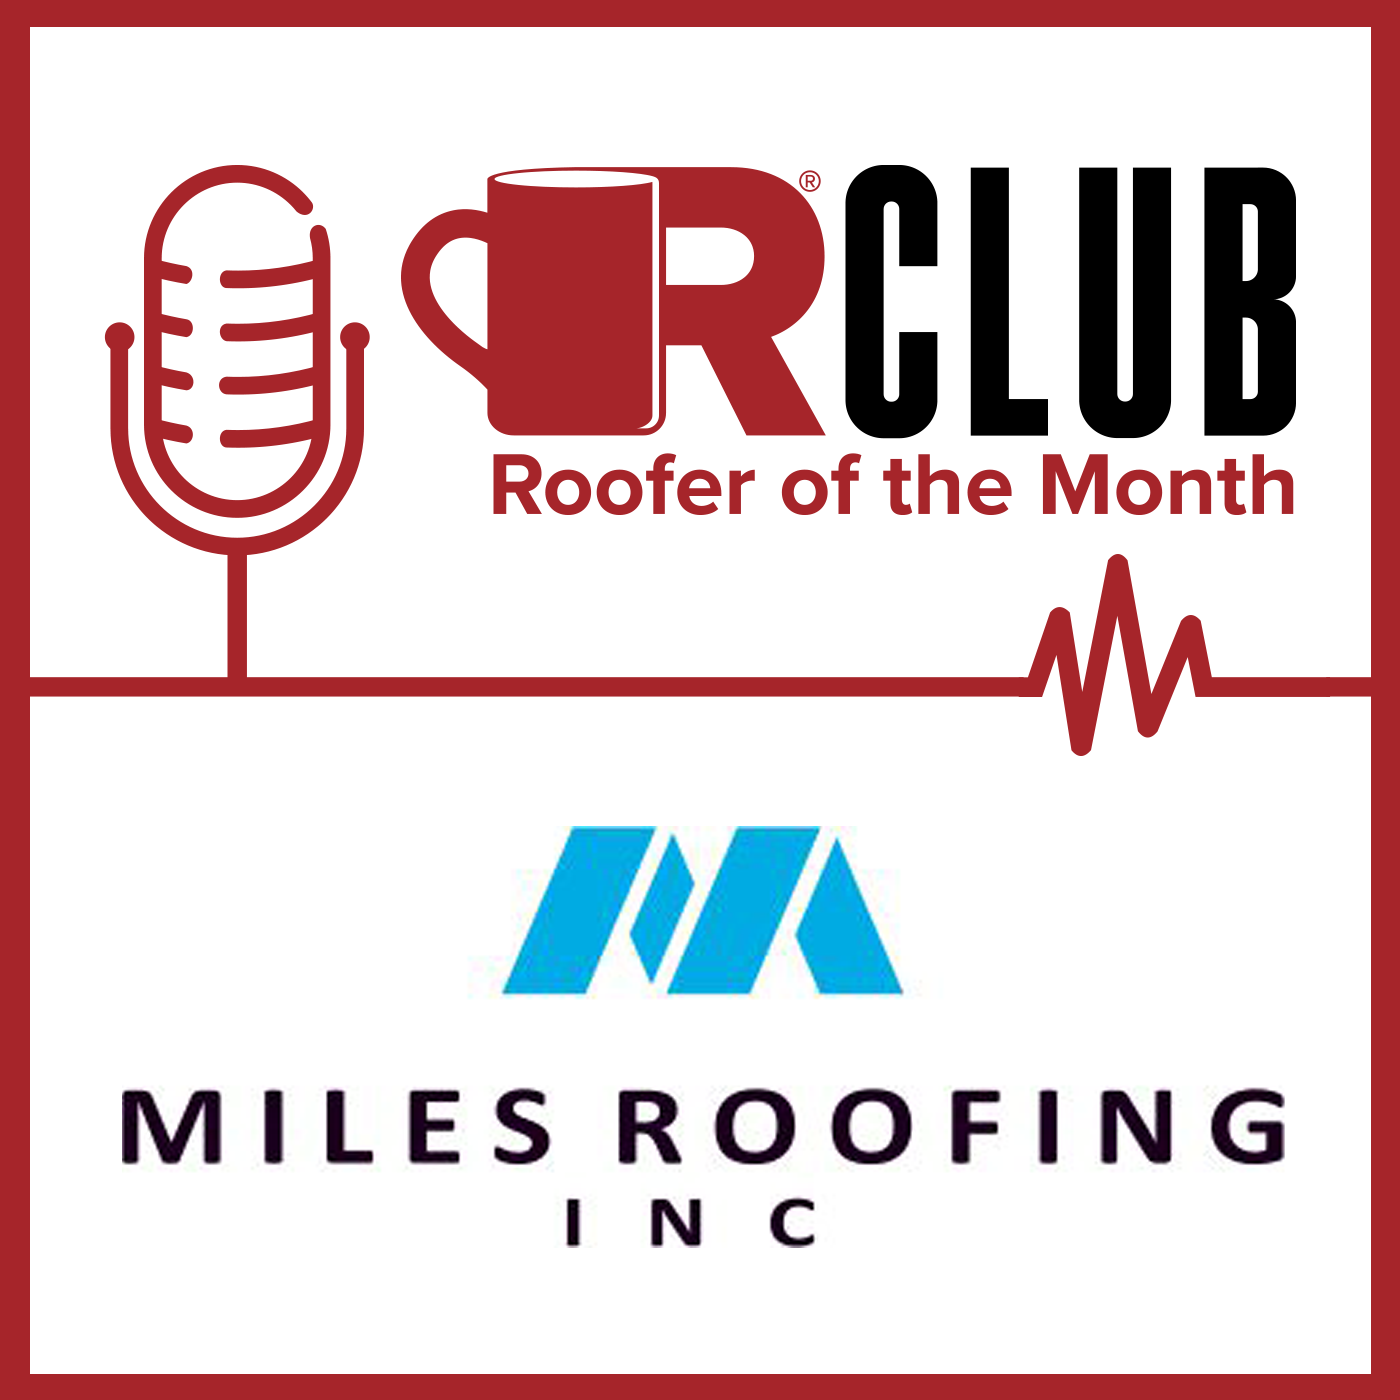 June ROTM Miles Roofing - POD